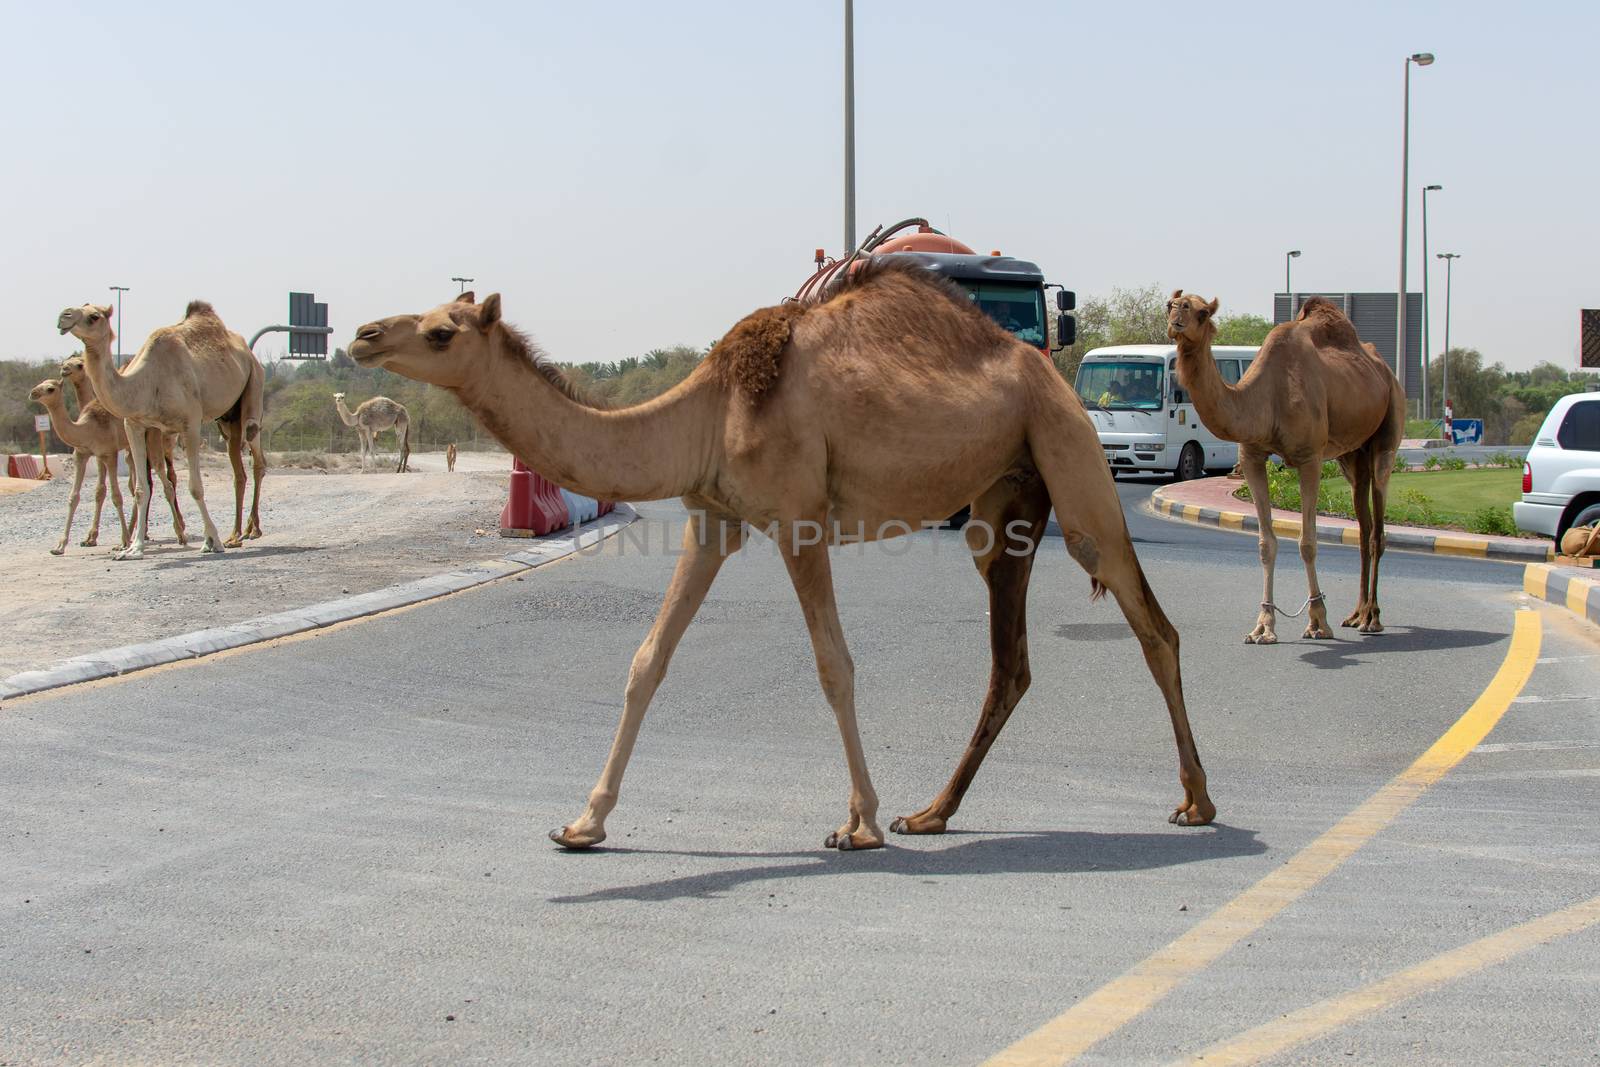 "Sharjah, Sharjah/United Arab Emirates - 6/14/2018: A group of camels cross the Middle Eastern Road while cars wait around the roundabout."